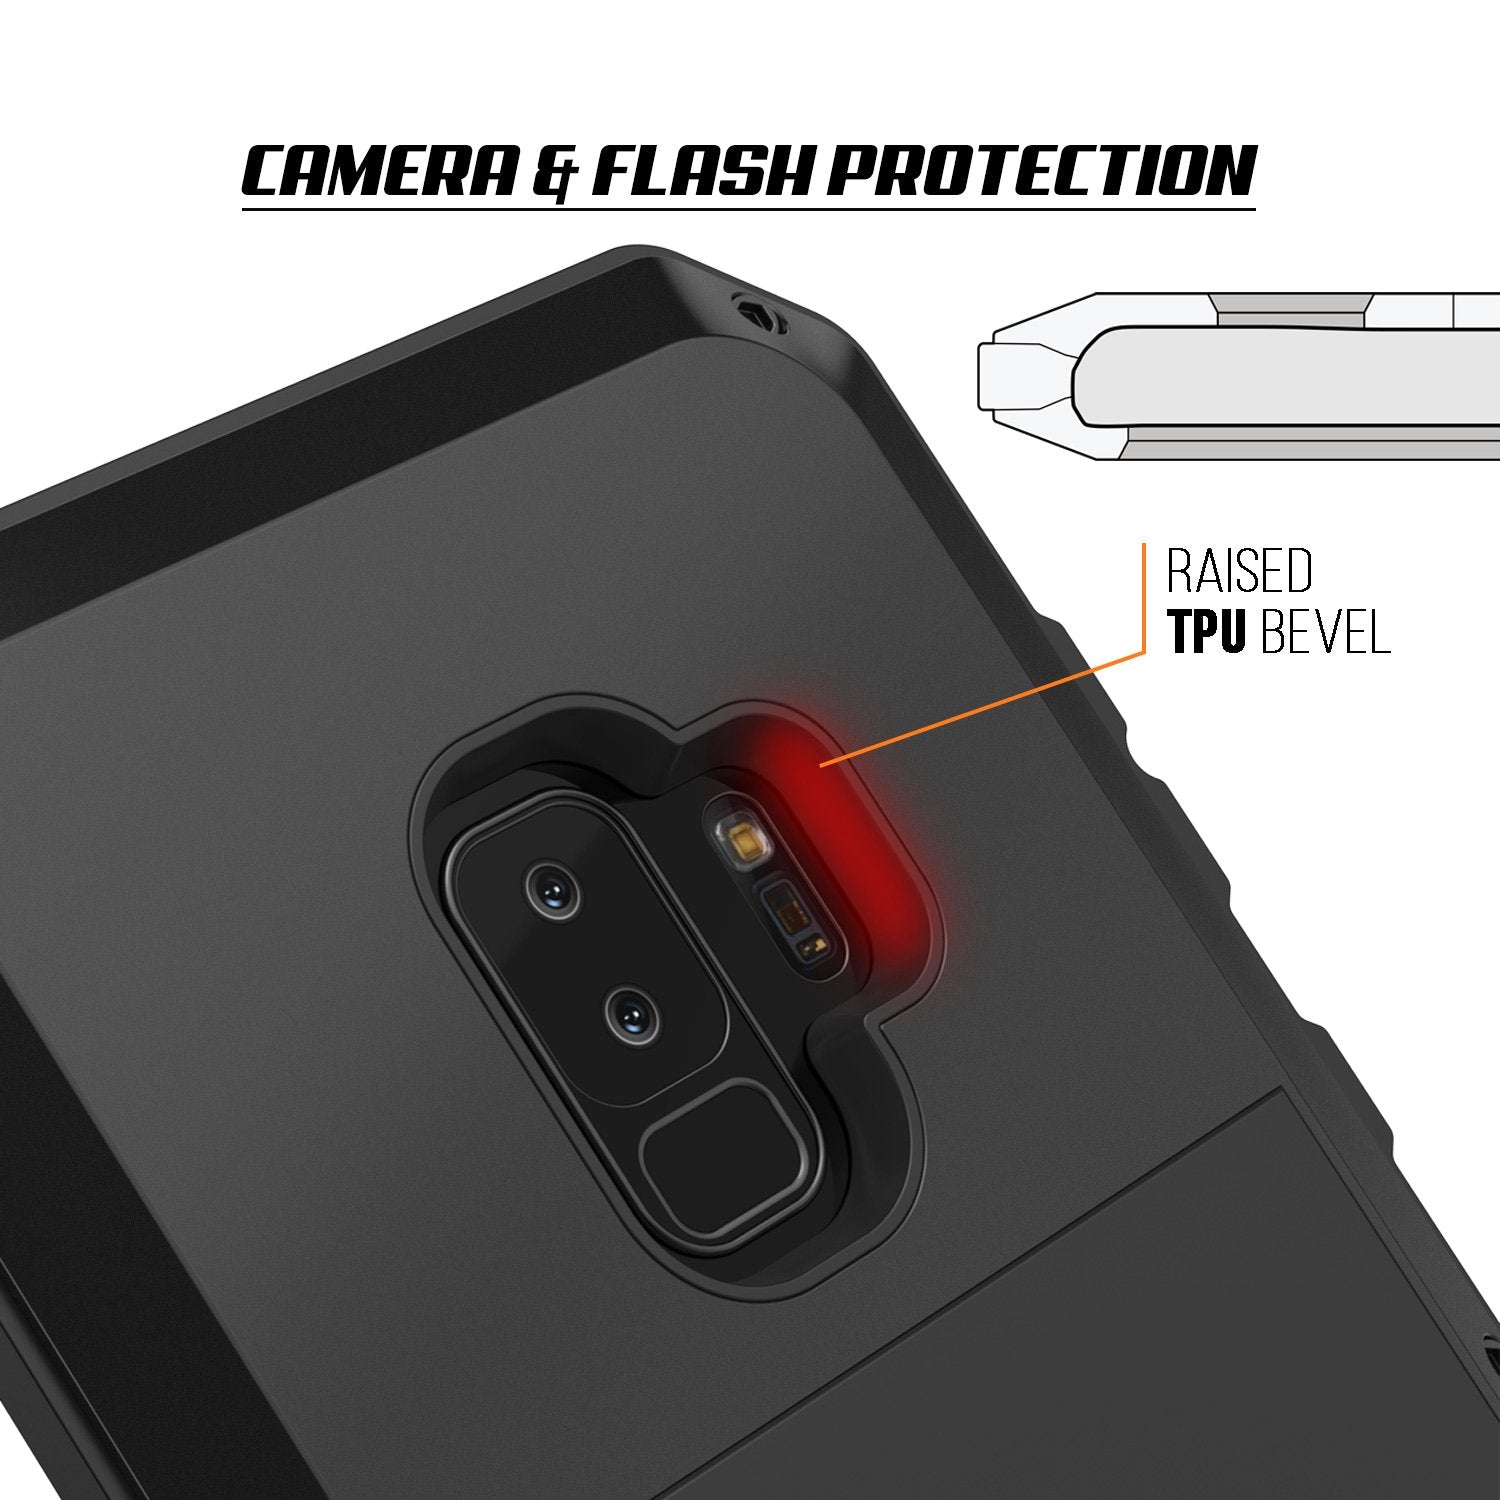 Galaxy S9 Plus Metal Case, Heavy Duty Military Grade Rugged Armor Cover [shock proof] Hybrid Full Body Hard Aluminum & TPU Design [non slip] W/ Prime Drop Protection for Samsung Galaxy S9 Plus [Black] - PunkCase NZ